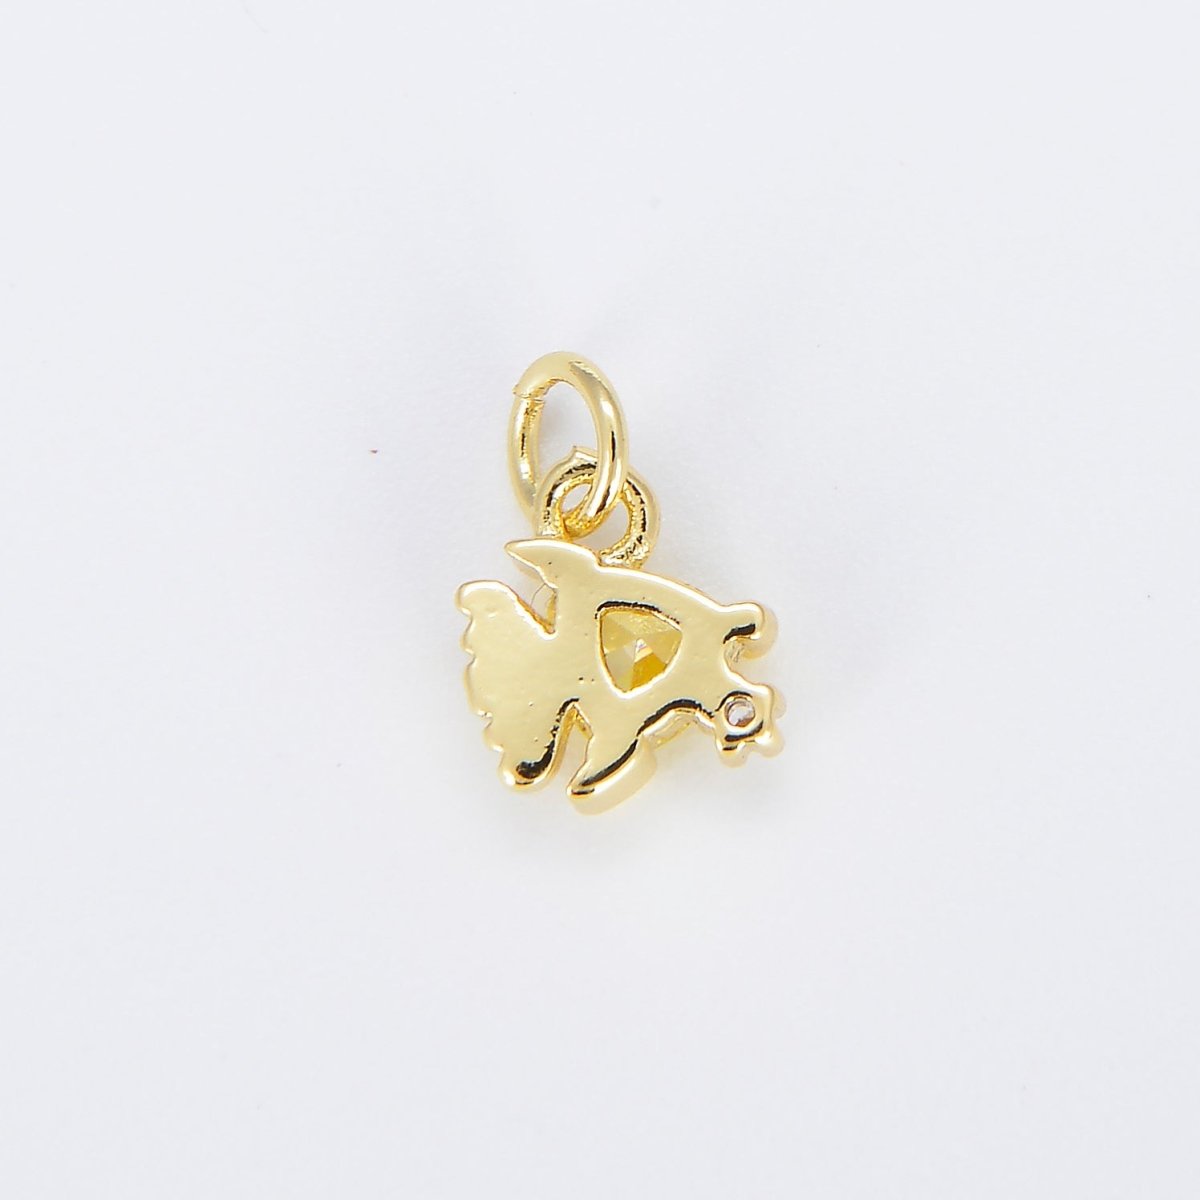 Tiny Gold Fish Charm Dainty Fish Pendant 14kt Gold Filled Charm Animal Charm Cubic Blue Under the sea Inspired E-874 - DLUXCA